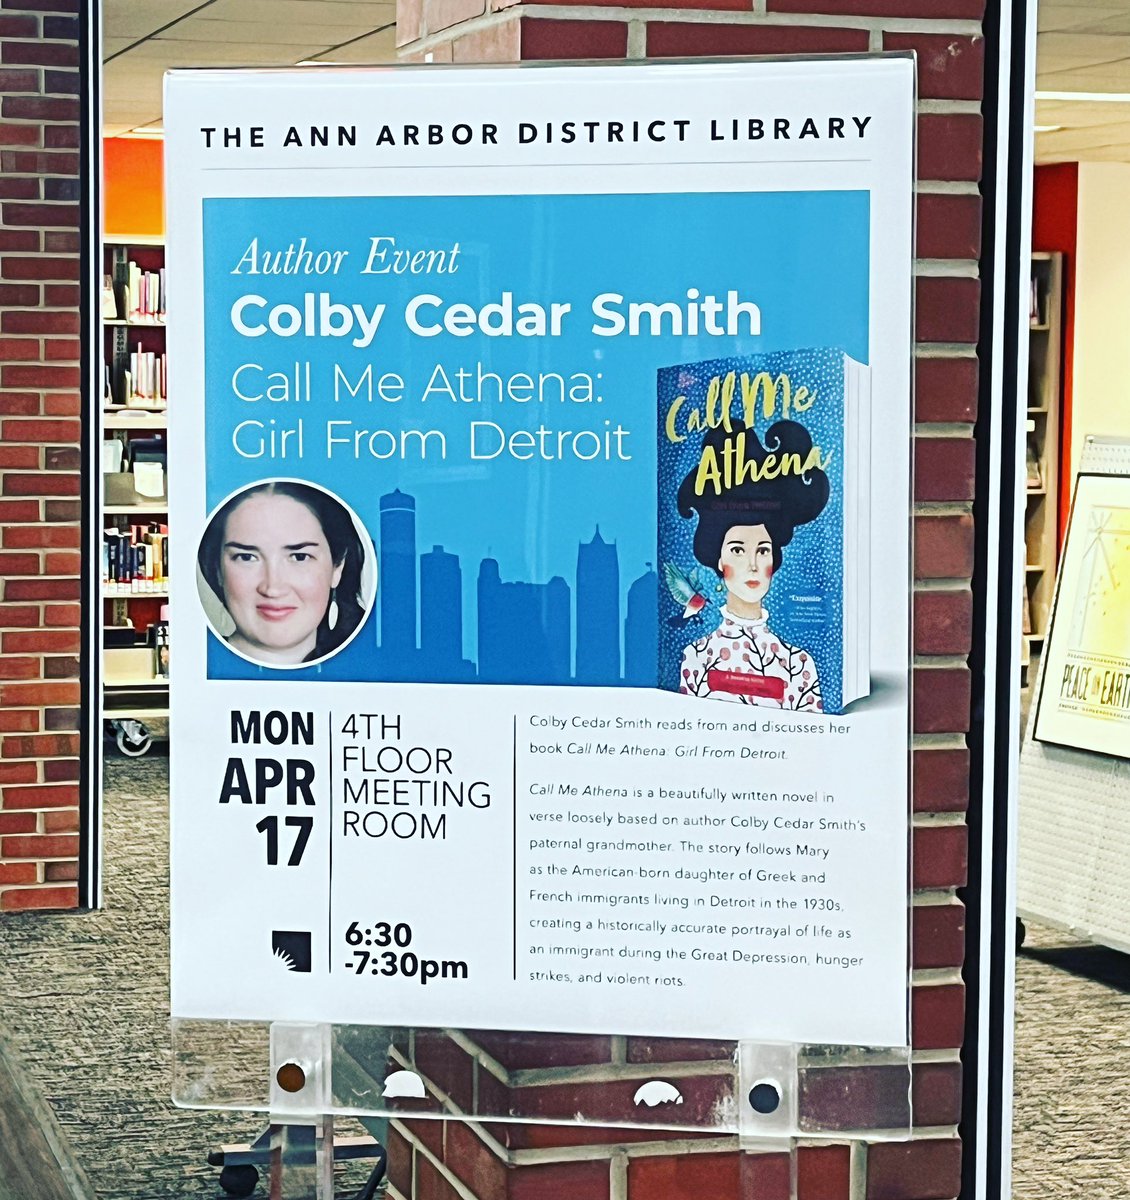 ✨I flew 600 miles and I’m in Michigan! I’m very excited for my event with @aadlgram and @literatibookstore tonight at the Ann Arbor District Library Downtown @6:30pm. Come join us! ✨

@AndrewsMcMeel @amp_kids @StimolaLiterary @allidhellegers 
#michigan #versenovels #yalit